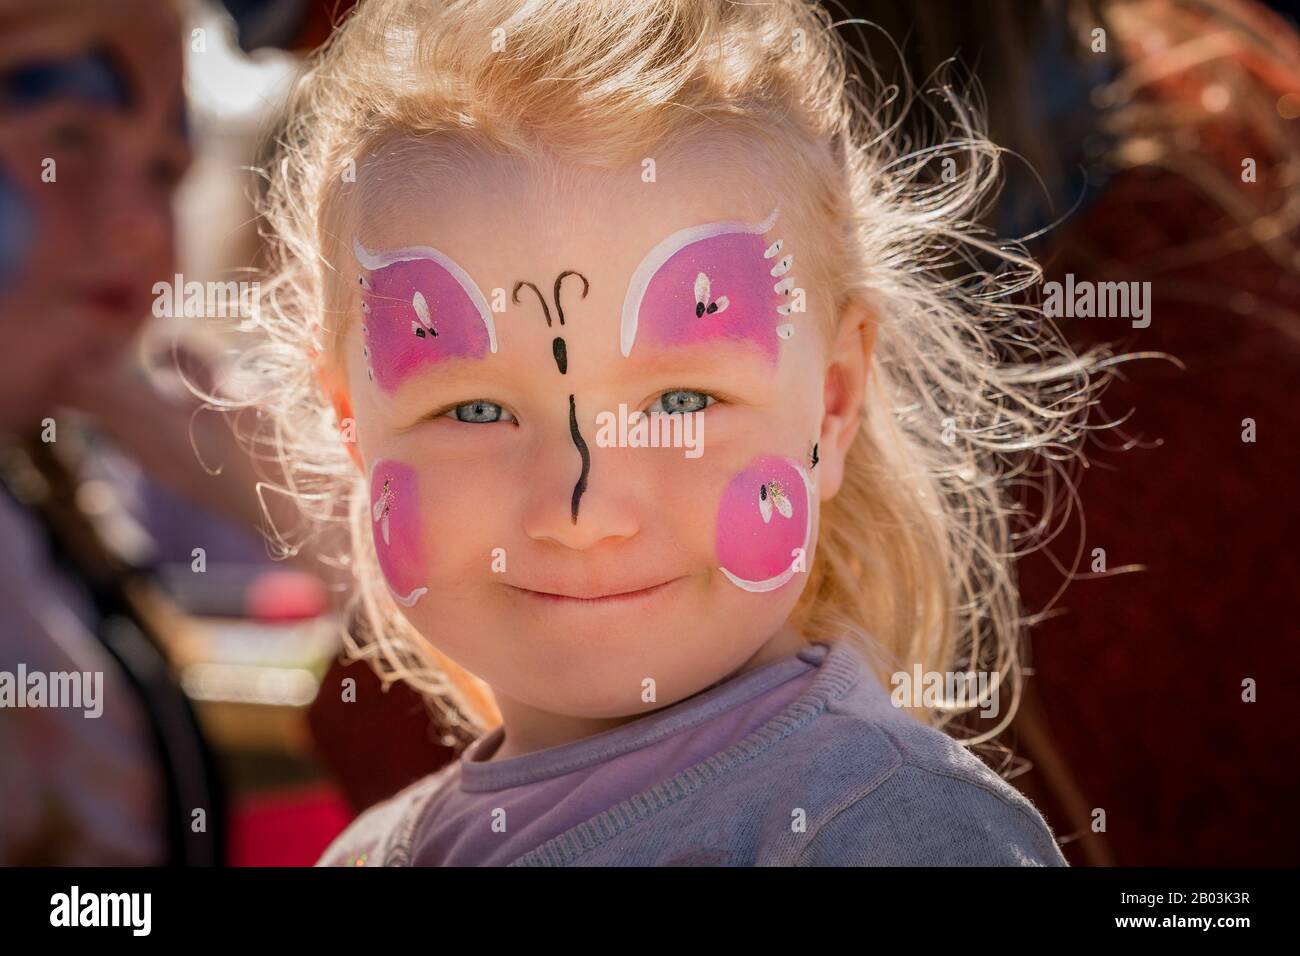 Young girl with face painted, summer festival, Reykjavik, Iceland Stock Photo